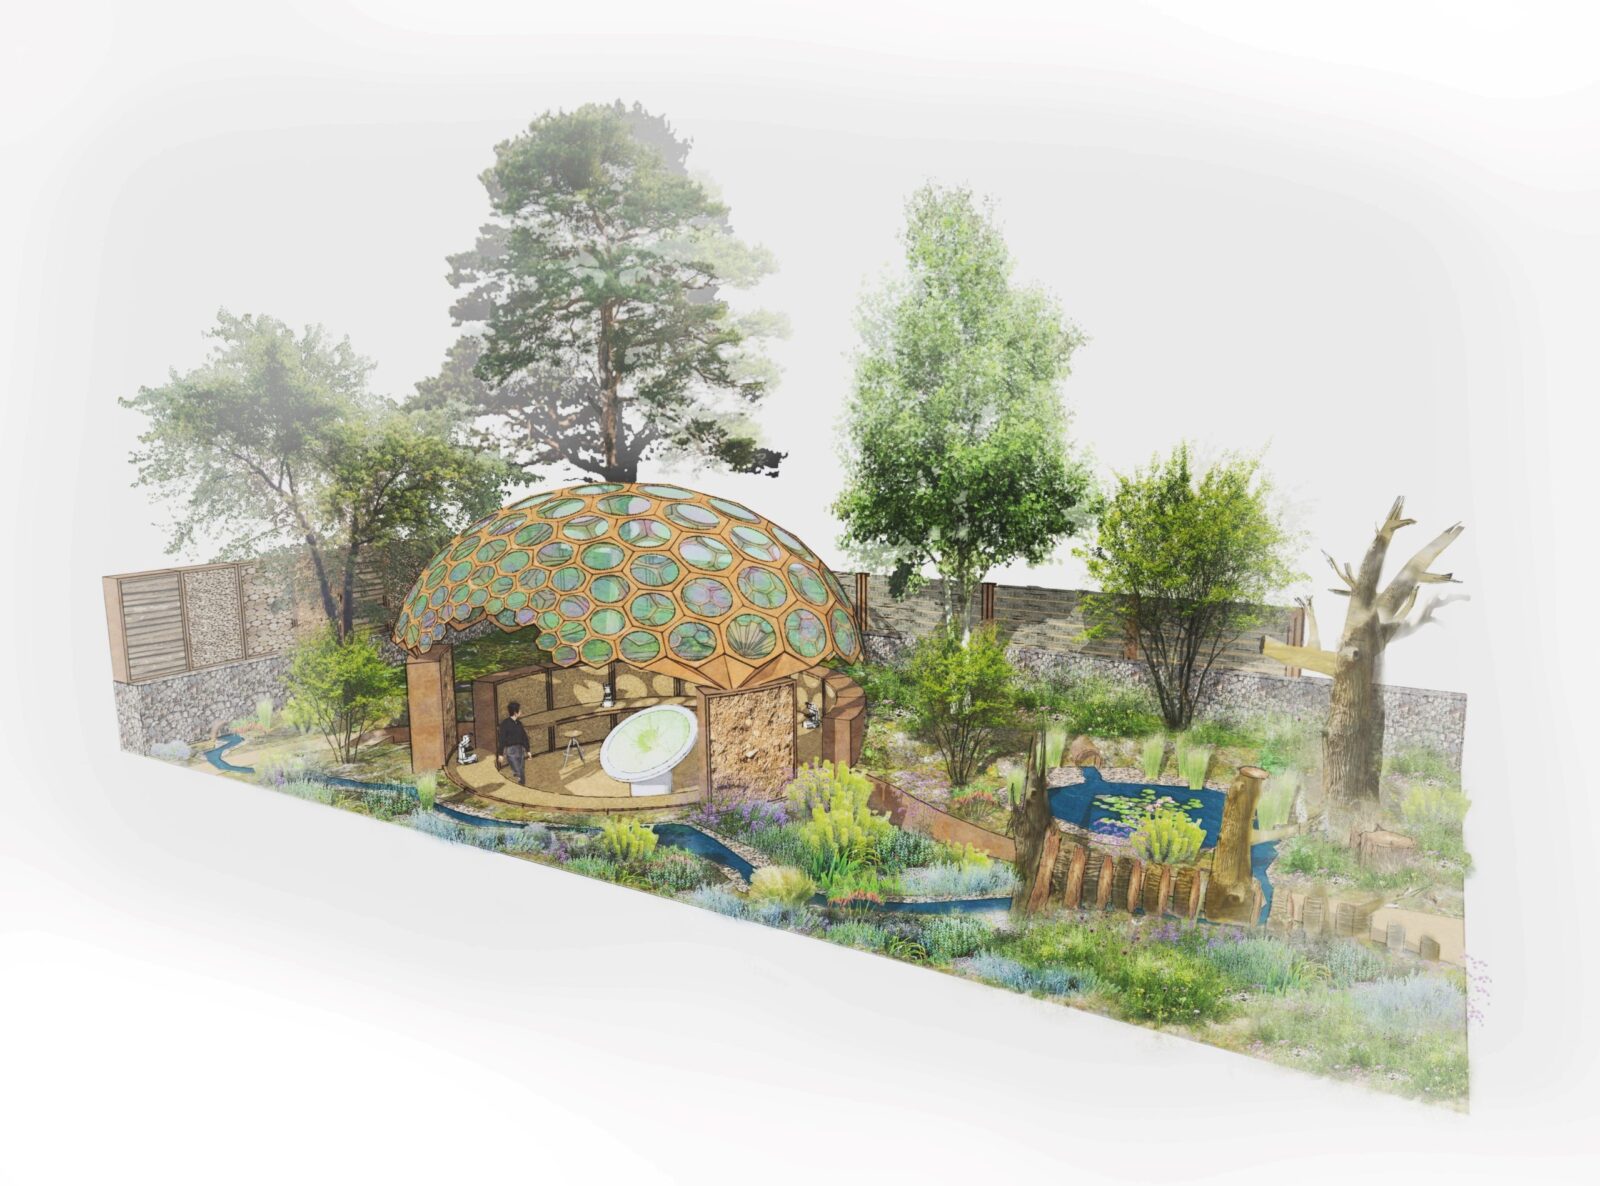 The Royal Entomological Society Garden designed by Chelsea Gold medal winner Tom Massey is inspired by the rich biodiversity found on brownfield sites, areas of wasteland that are highly beneficial to insect life.